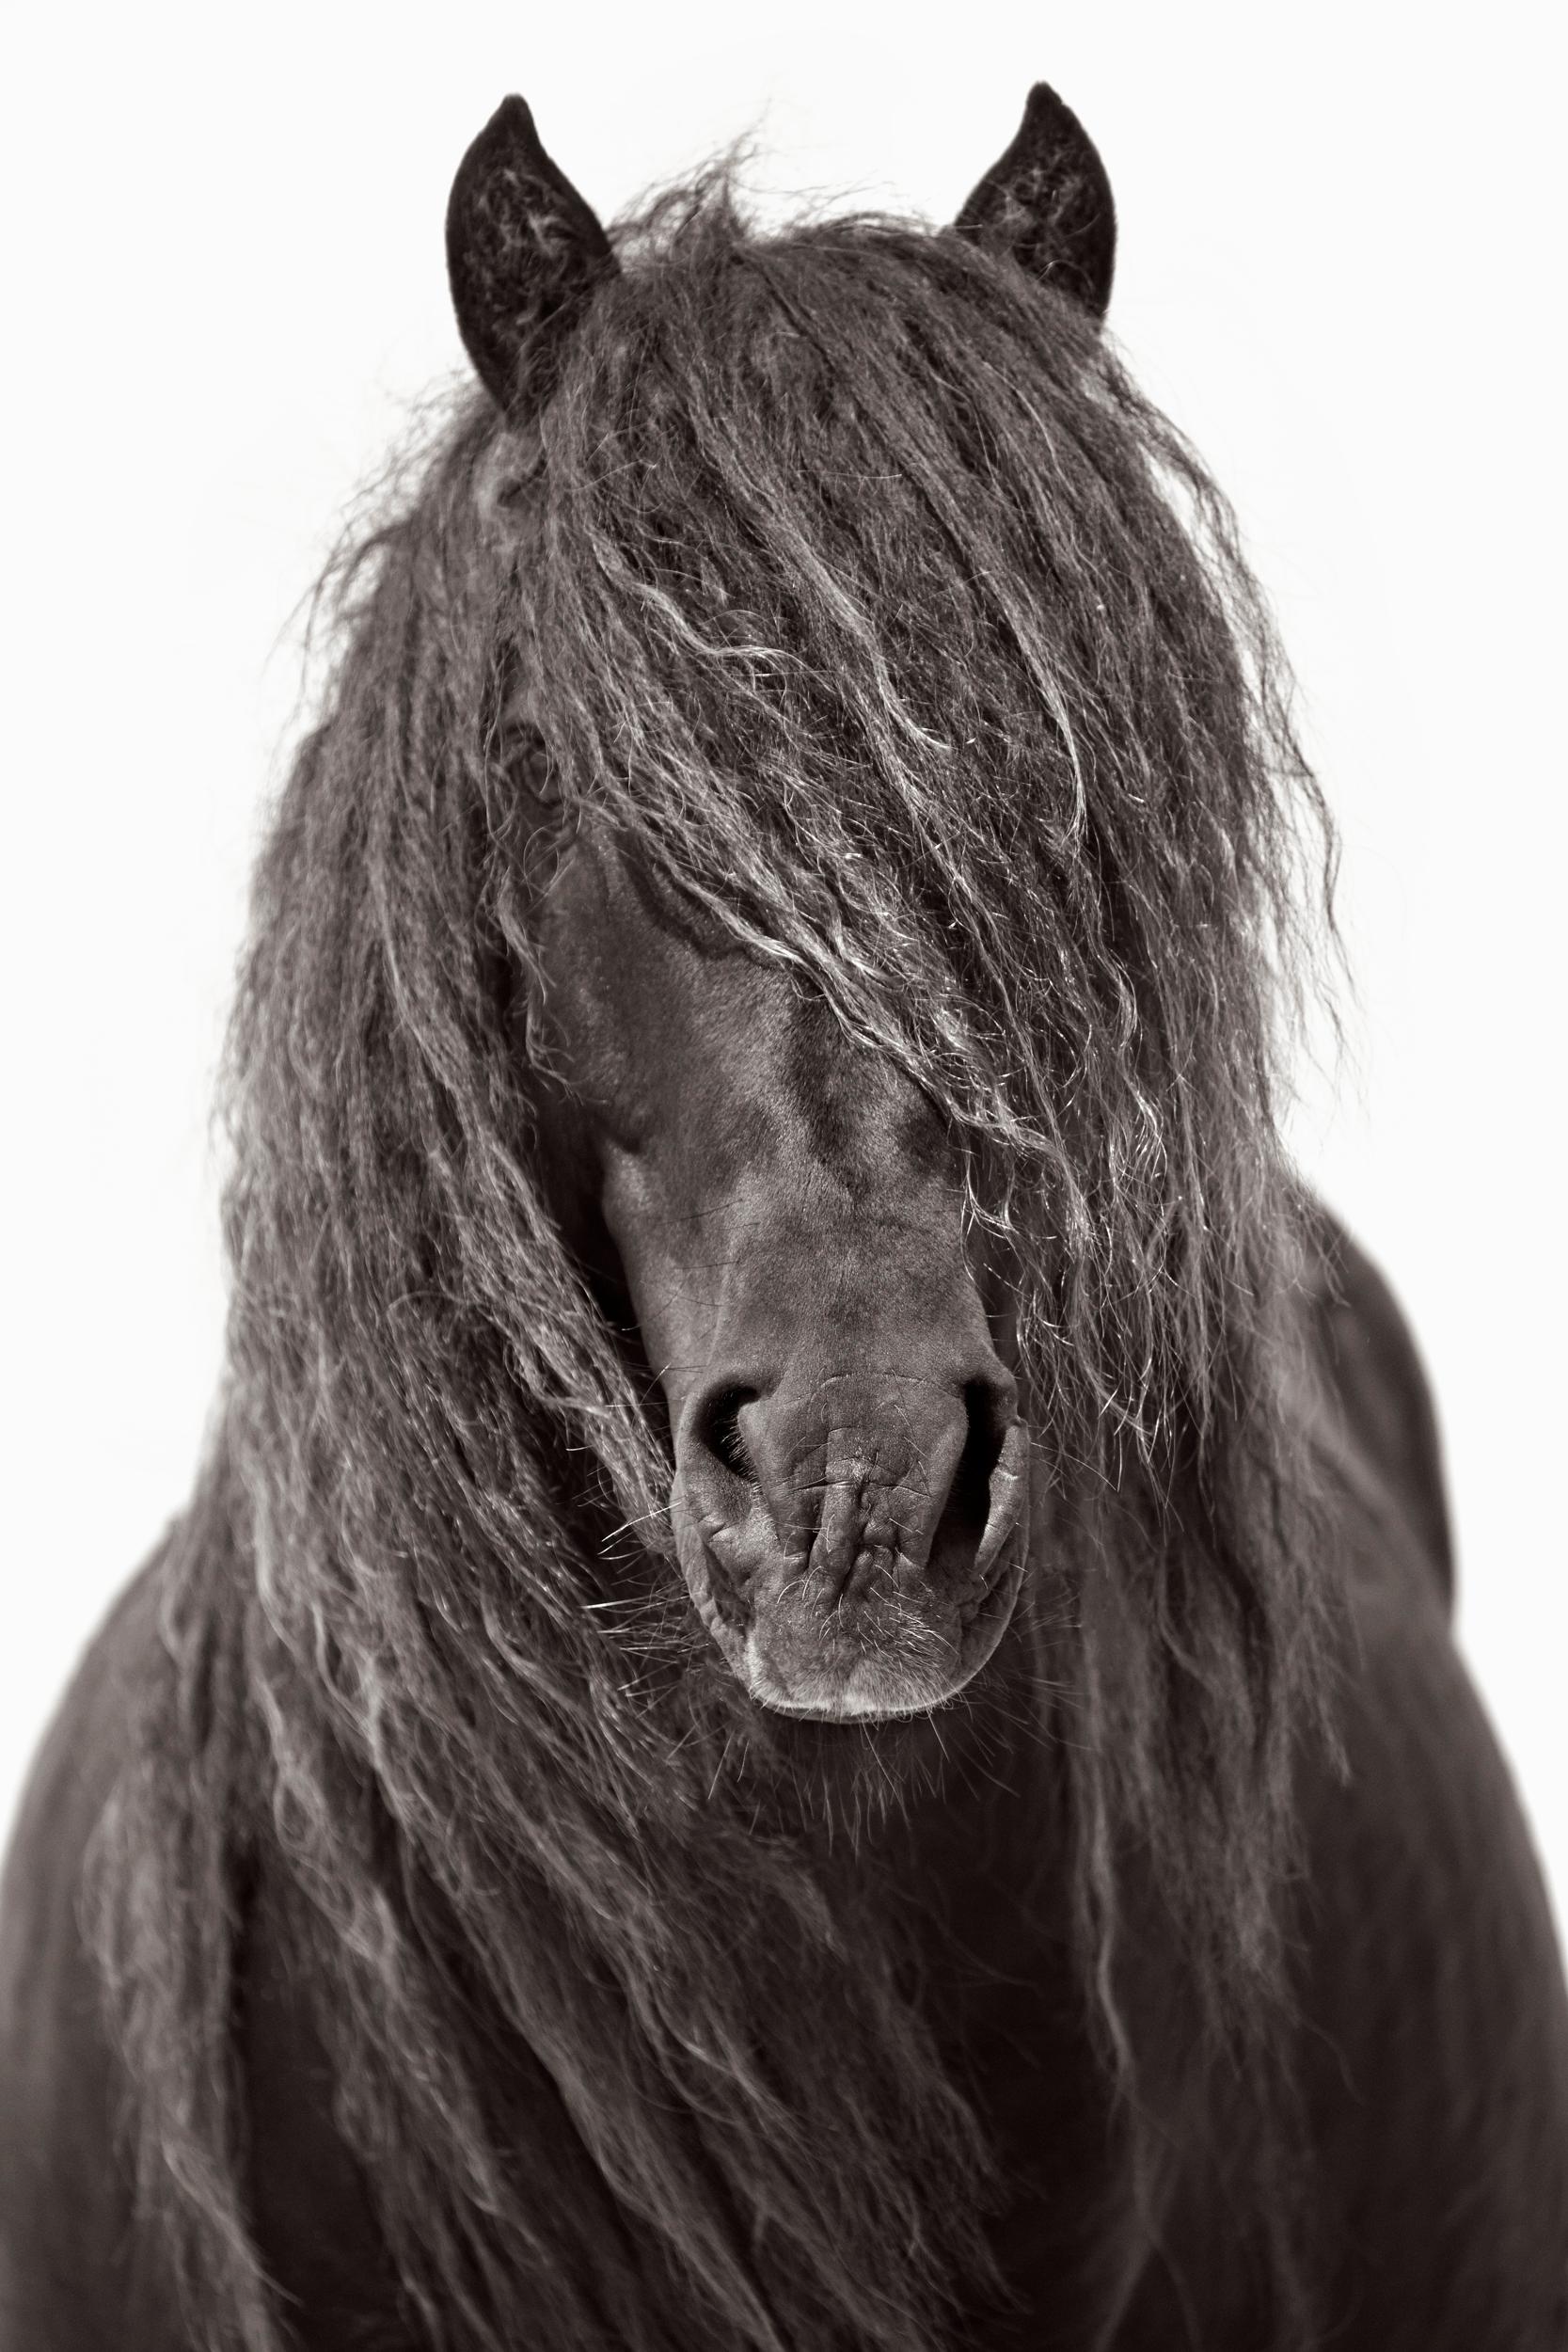 Drew Doggett Black and White Photograph - Intimate Portrait of a Sable Island Horse's Beautiful Mane, Fashion, Iconic